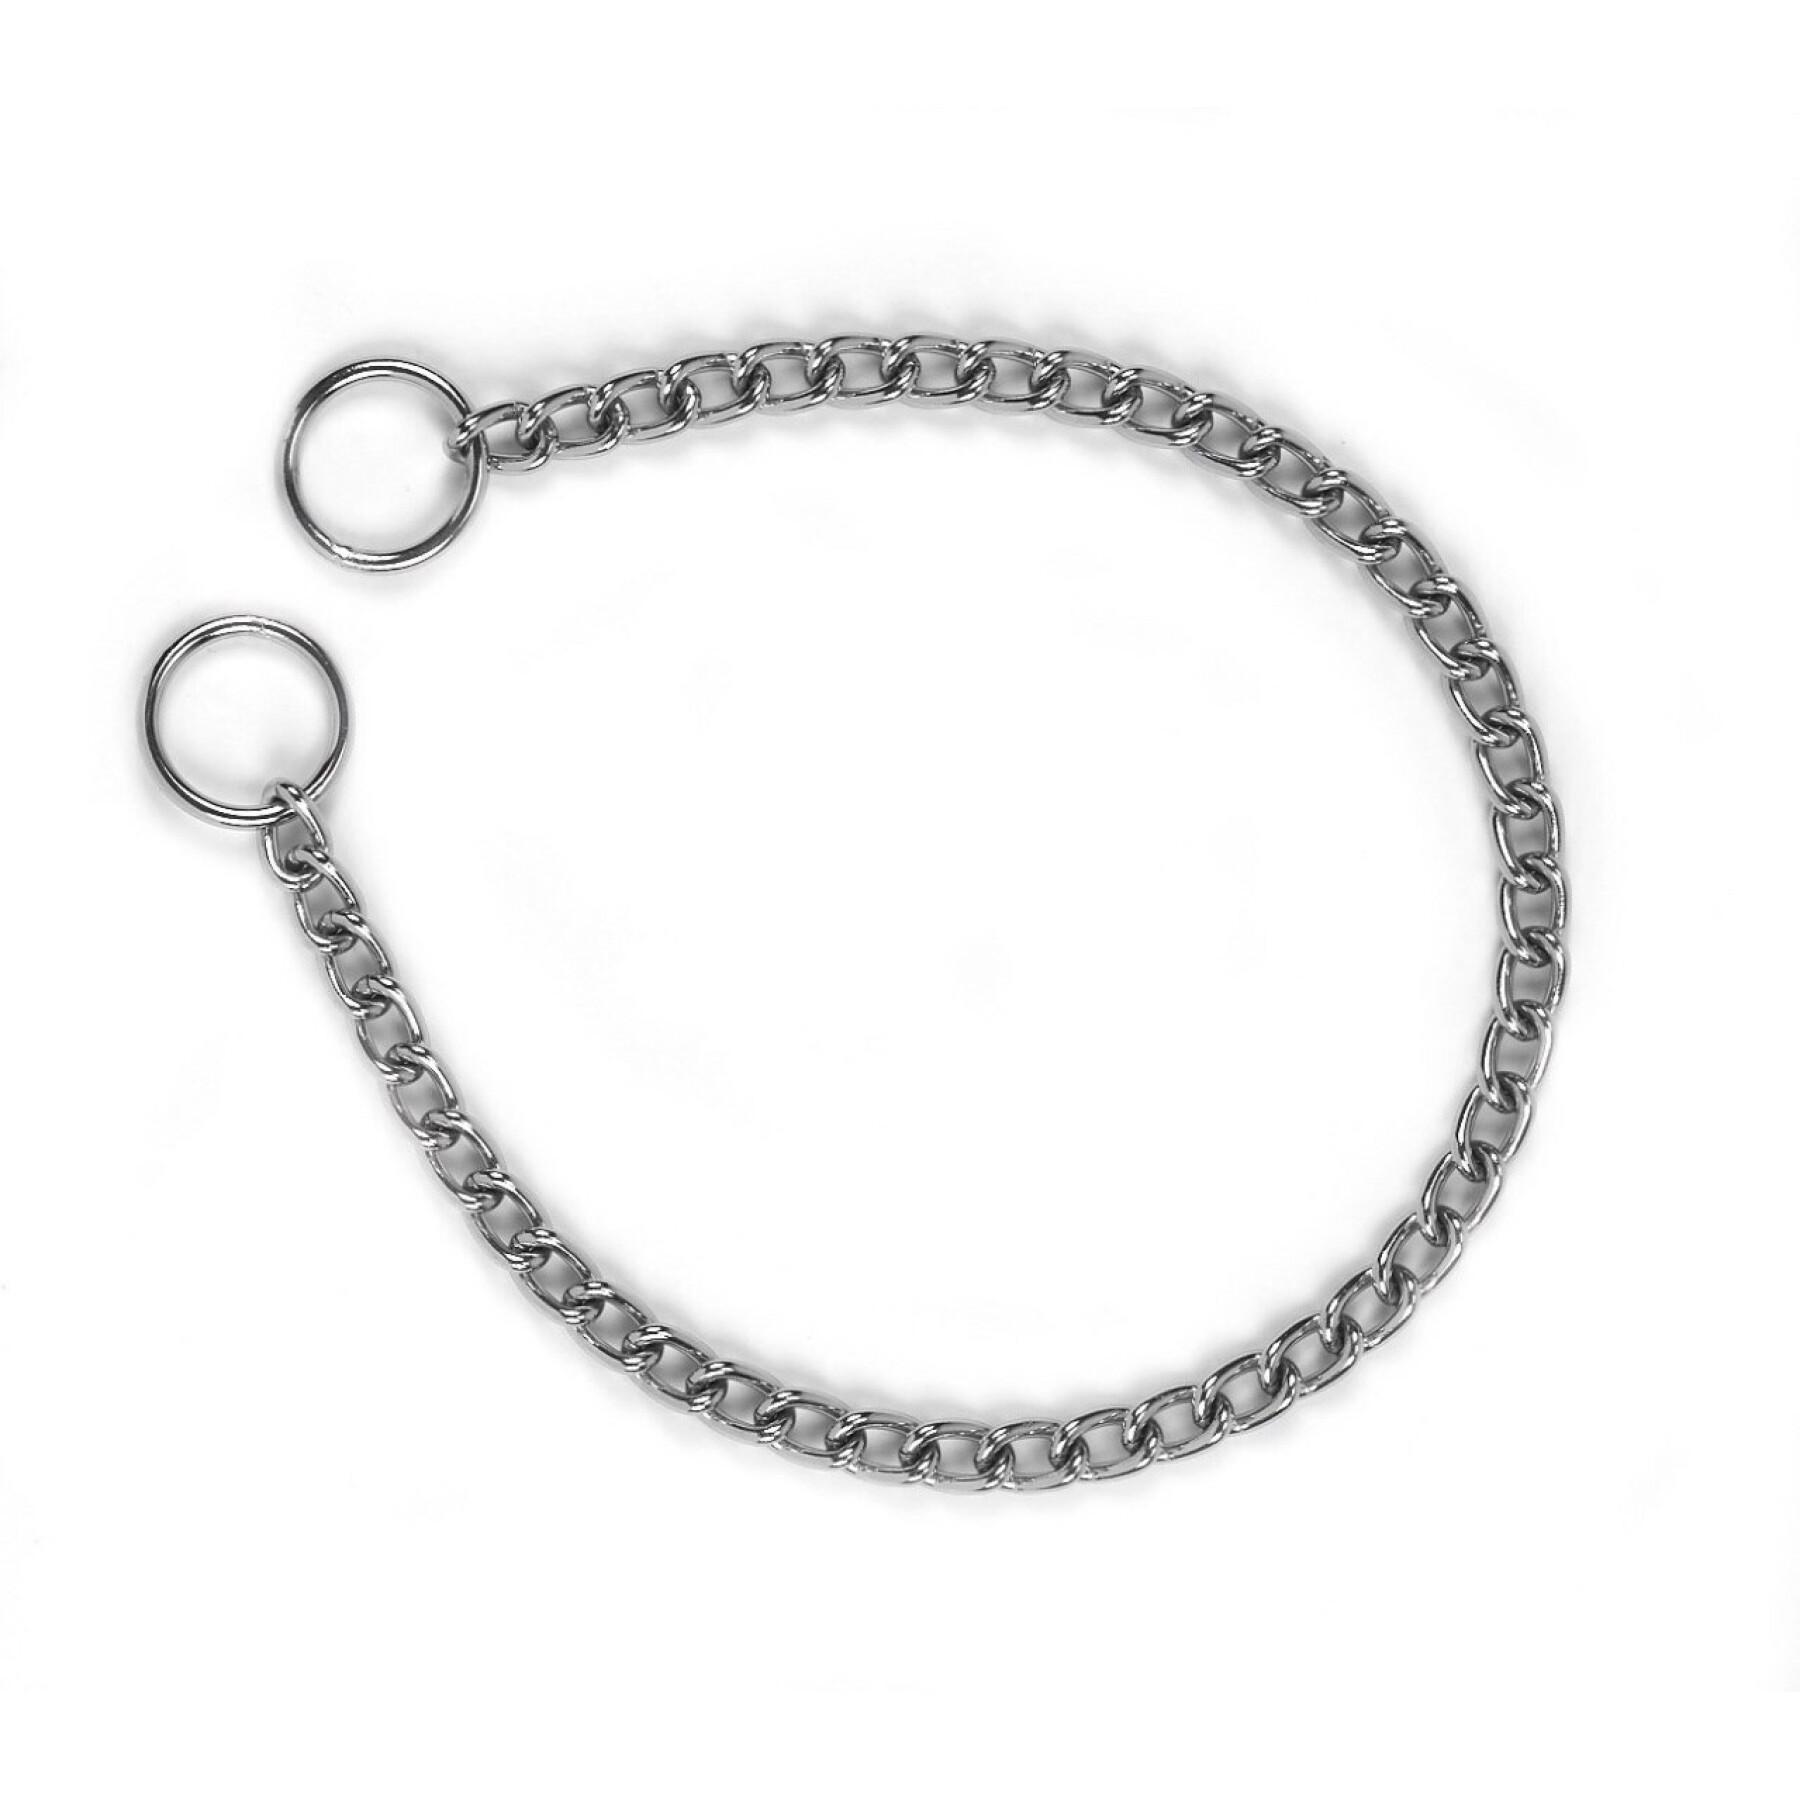 Chromium-plated chain collar for dogs Kerbl